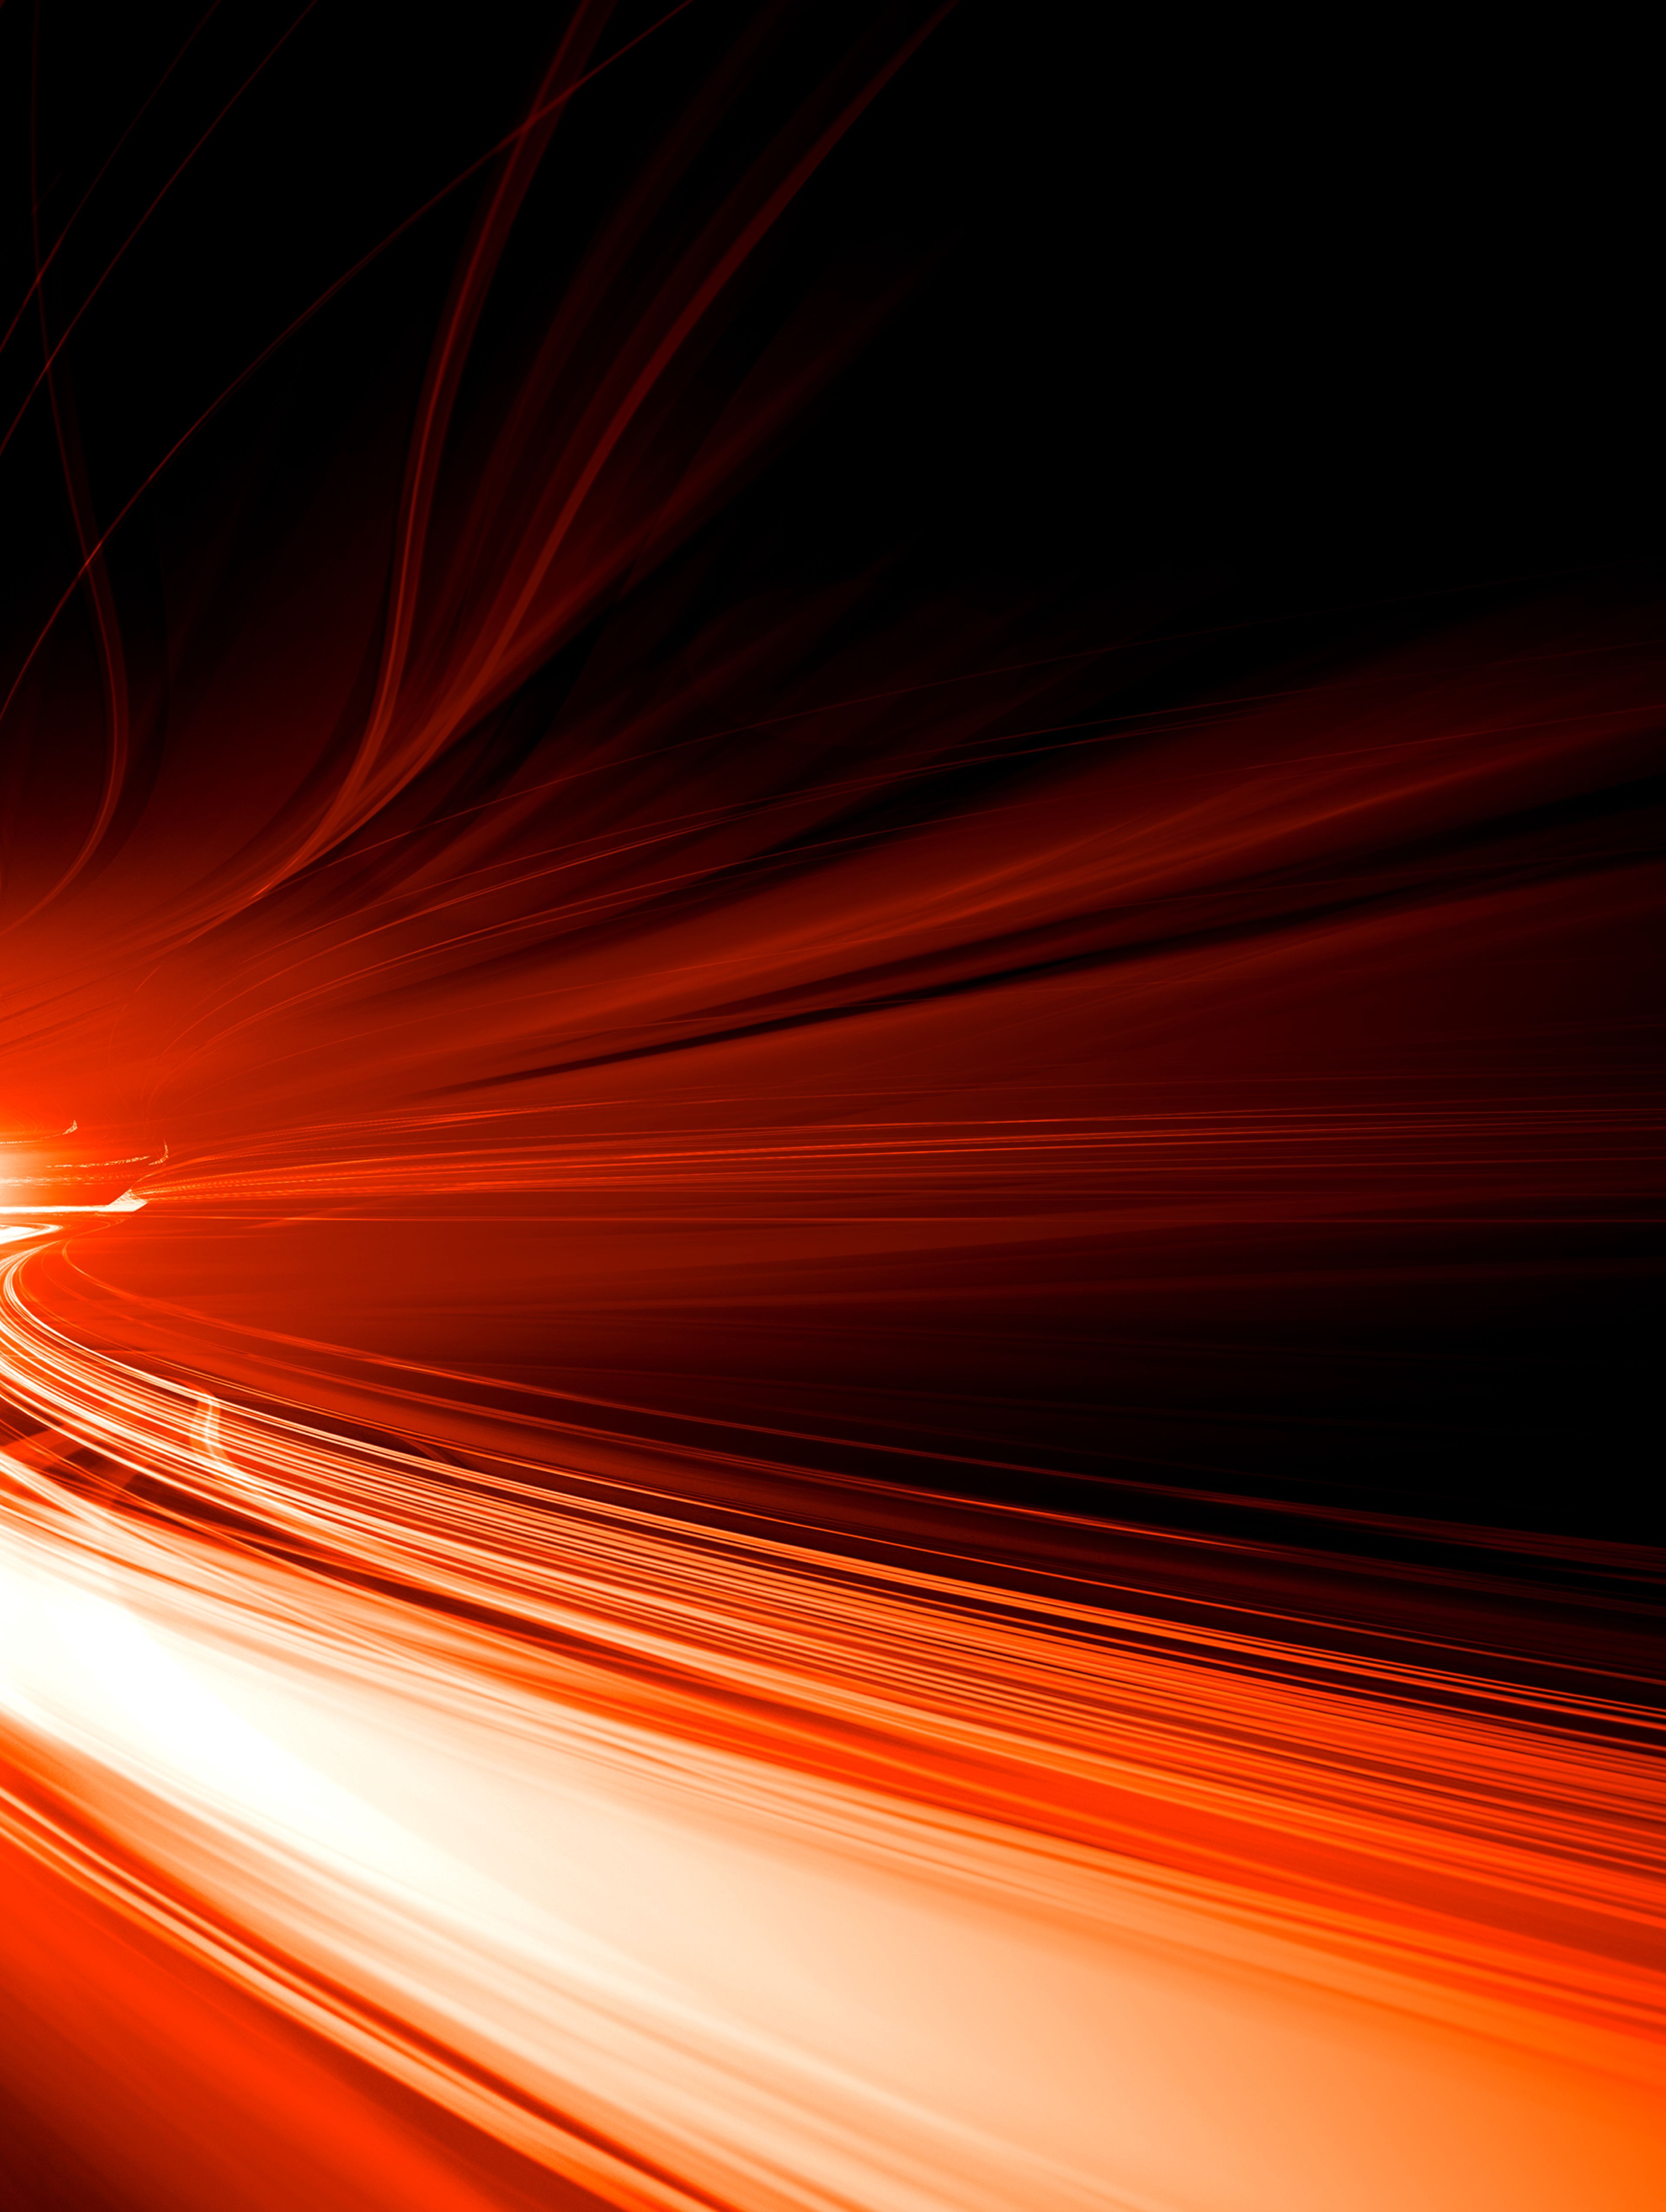 Black background image with red, orange and white light flares